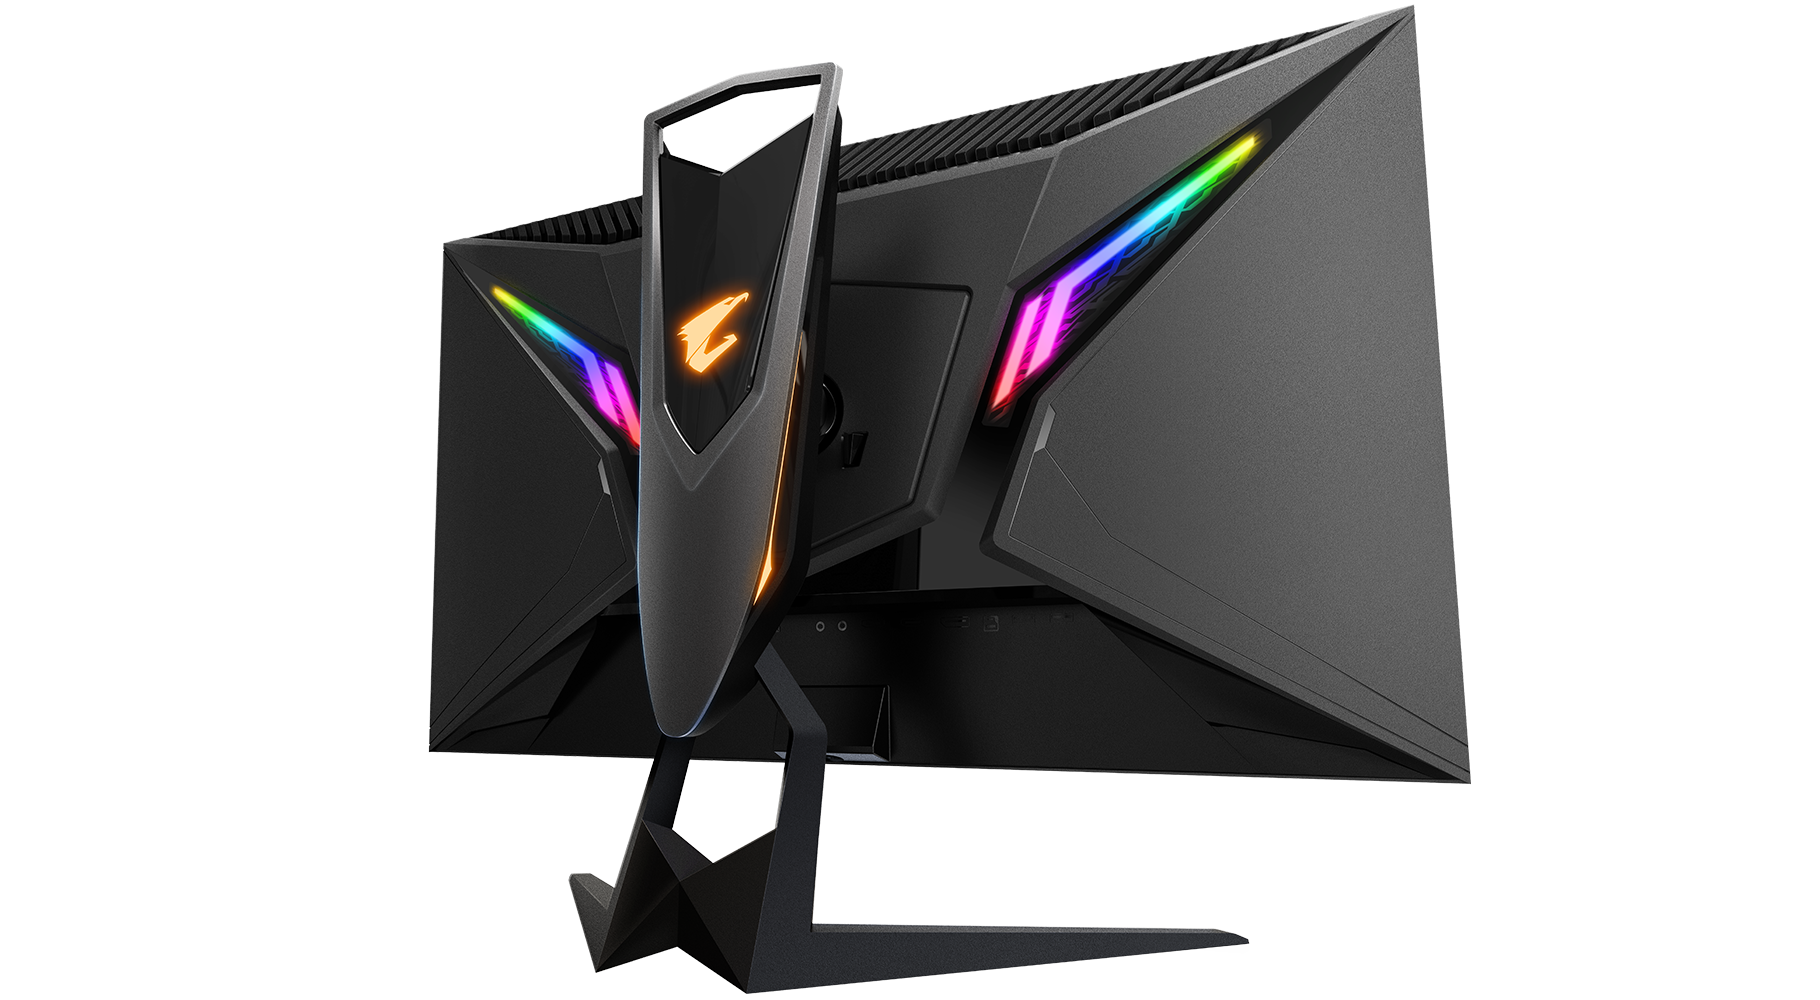 Media asset in full size related to 3dfxzone.it news item entitled as follows: GIGABYTE introduce il gaming monitor AORUS FI27Q-P: 2K a 165Hz con HBR3 | Image Name: news30637_AORUS-FI27Q-P_3.png